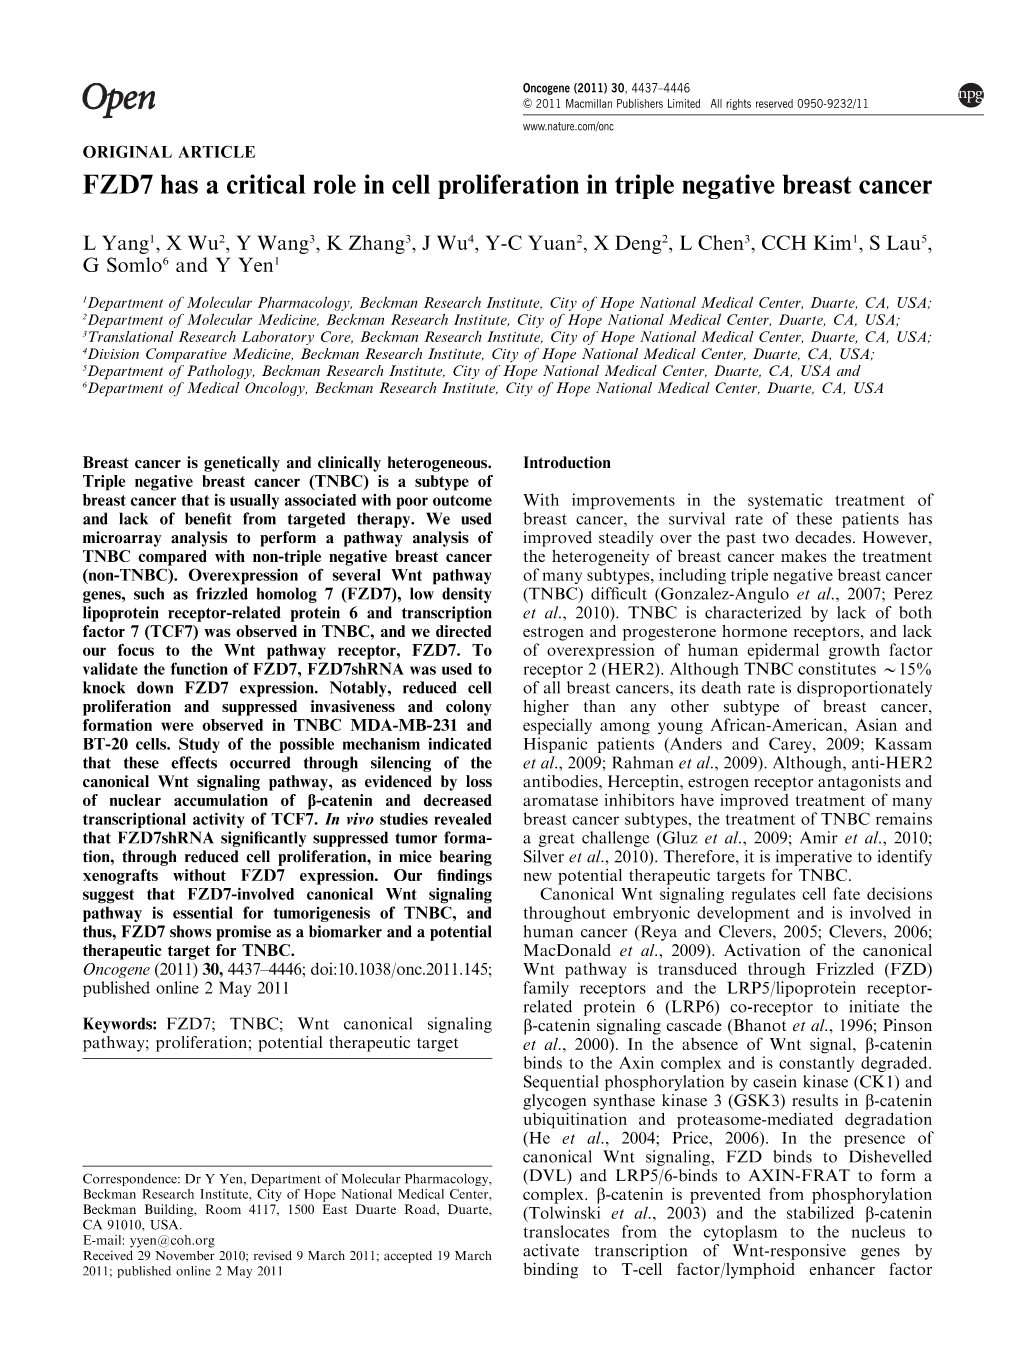 FZD7 Has a Critical Role in Cell Proliferation in Triple Negative Breast Cancer